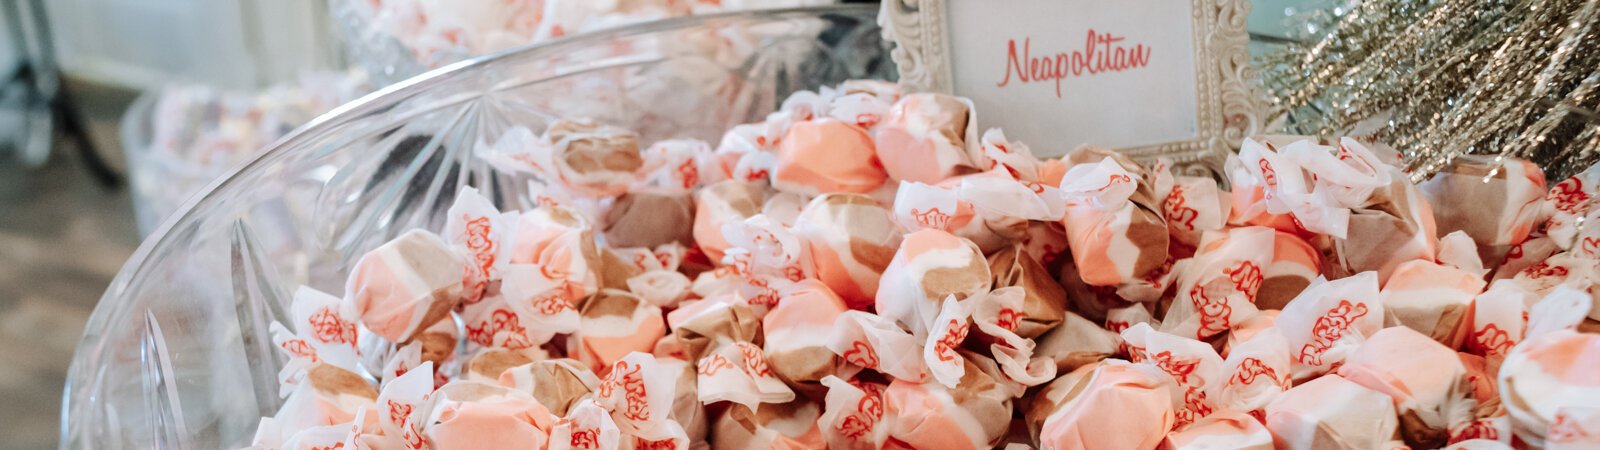 A taffy display is part of the whimsical wonderland of candy available at A Spoonful of Sugar in Roanoke.